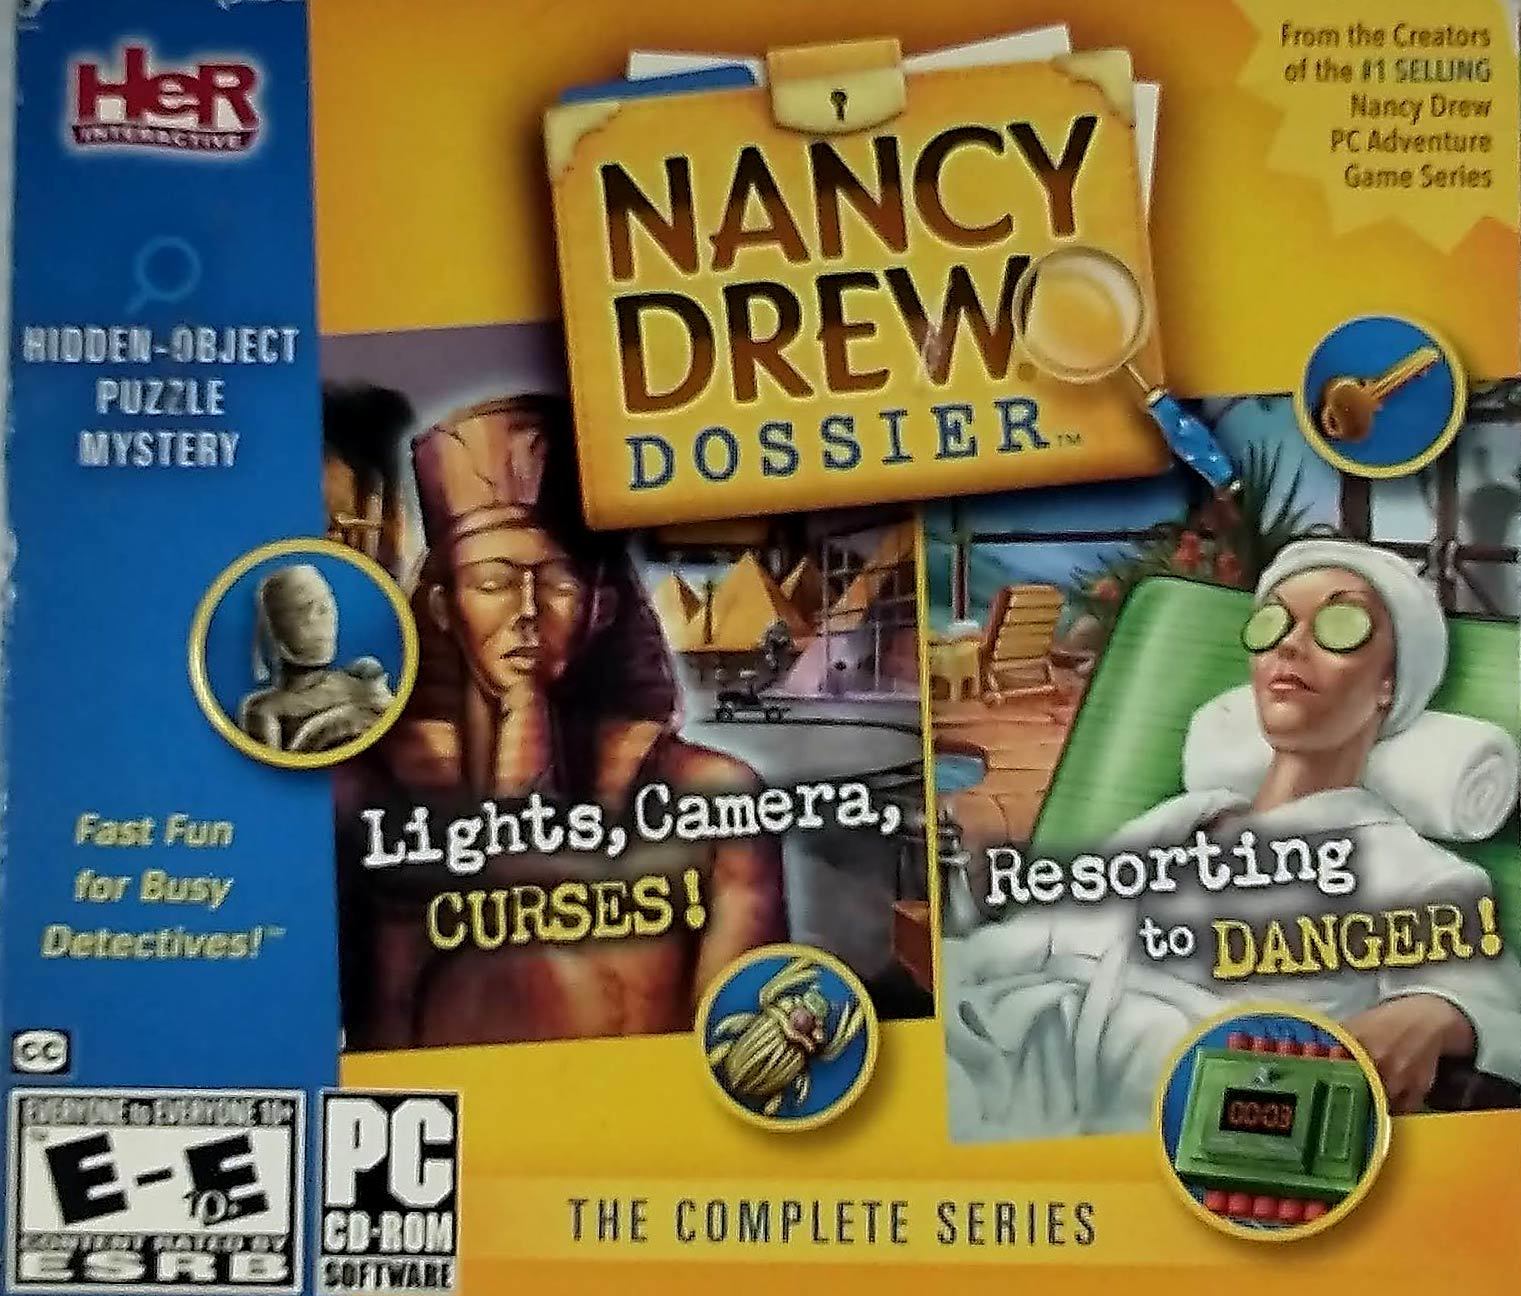 Primary image for Nancy Drew Dossier: The Complete Series [PC CD-ROM, 2010] Hidden Object Games